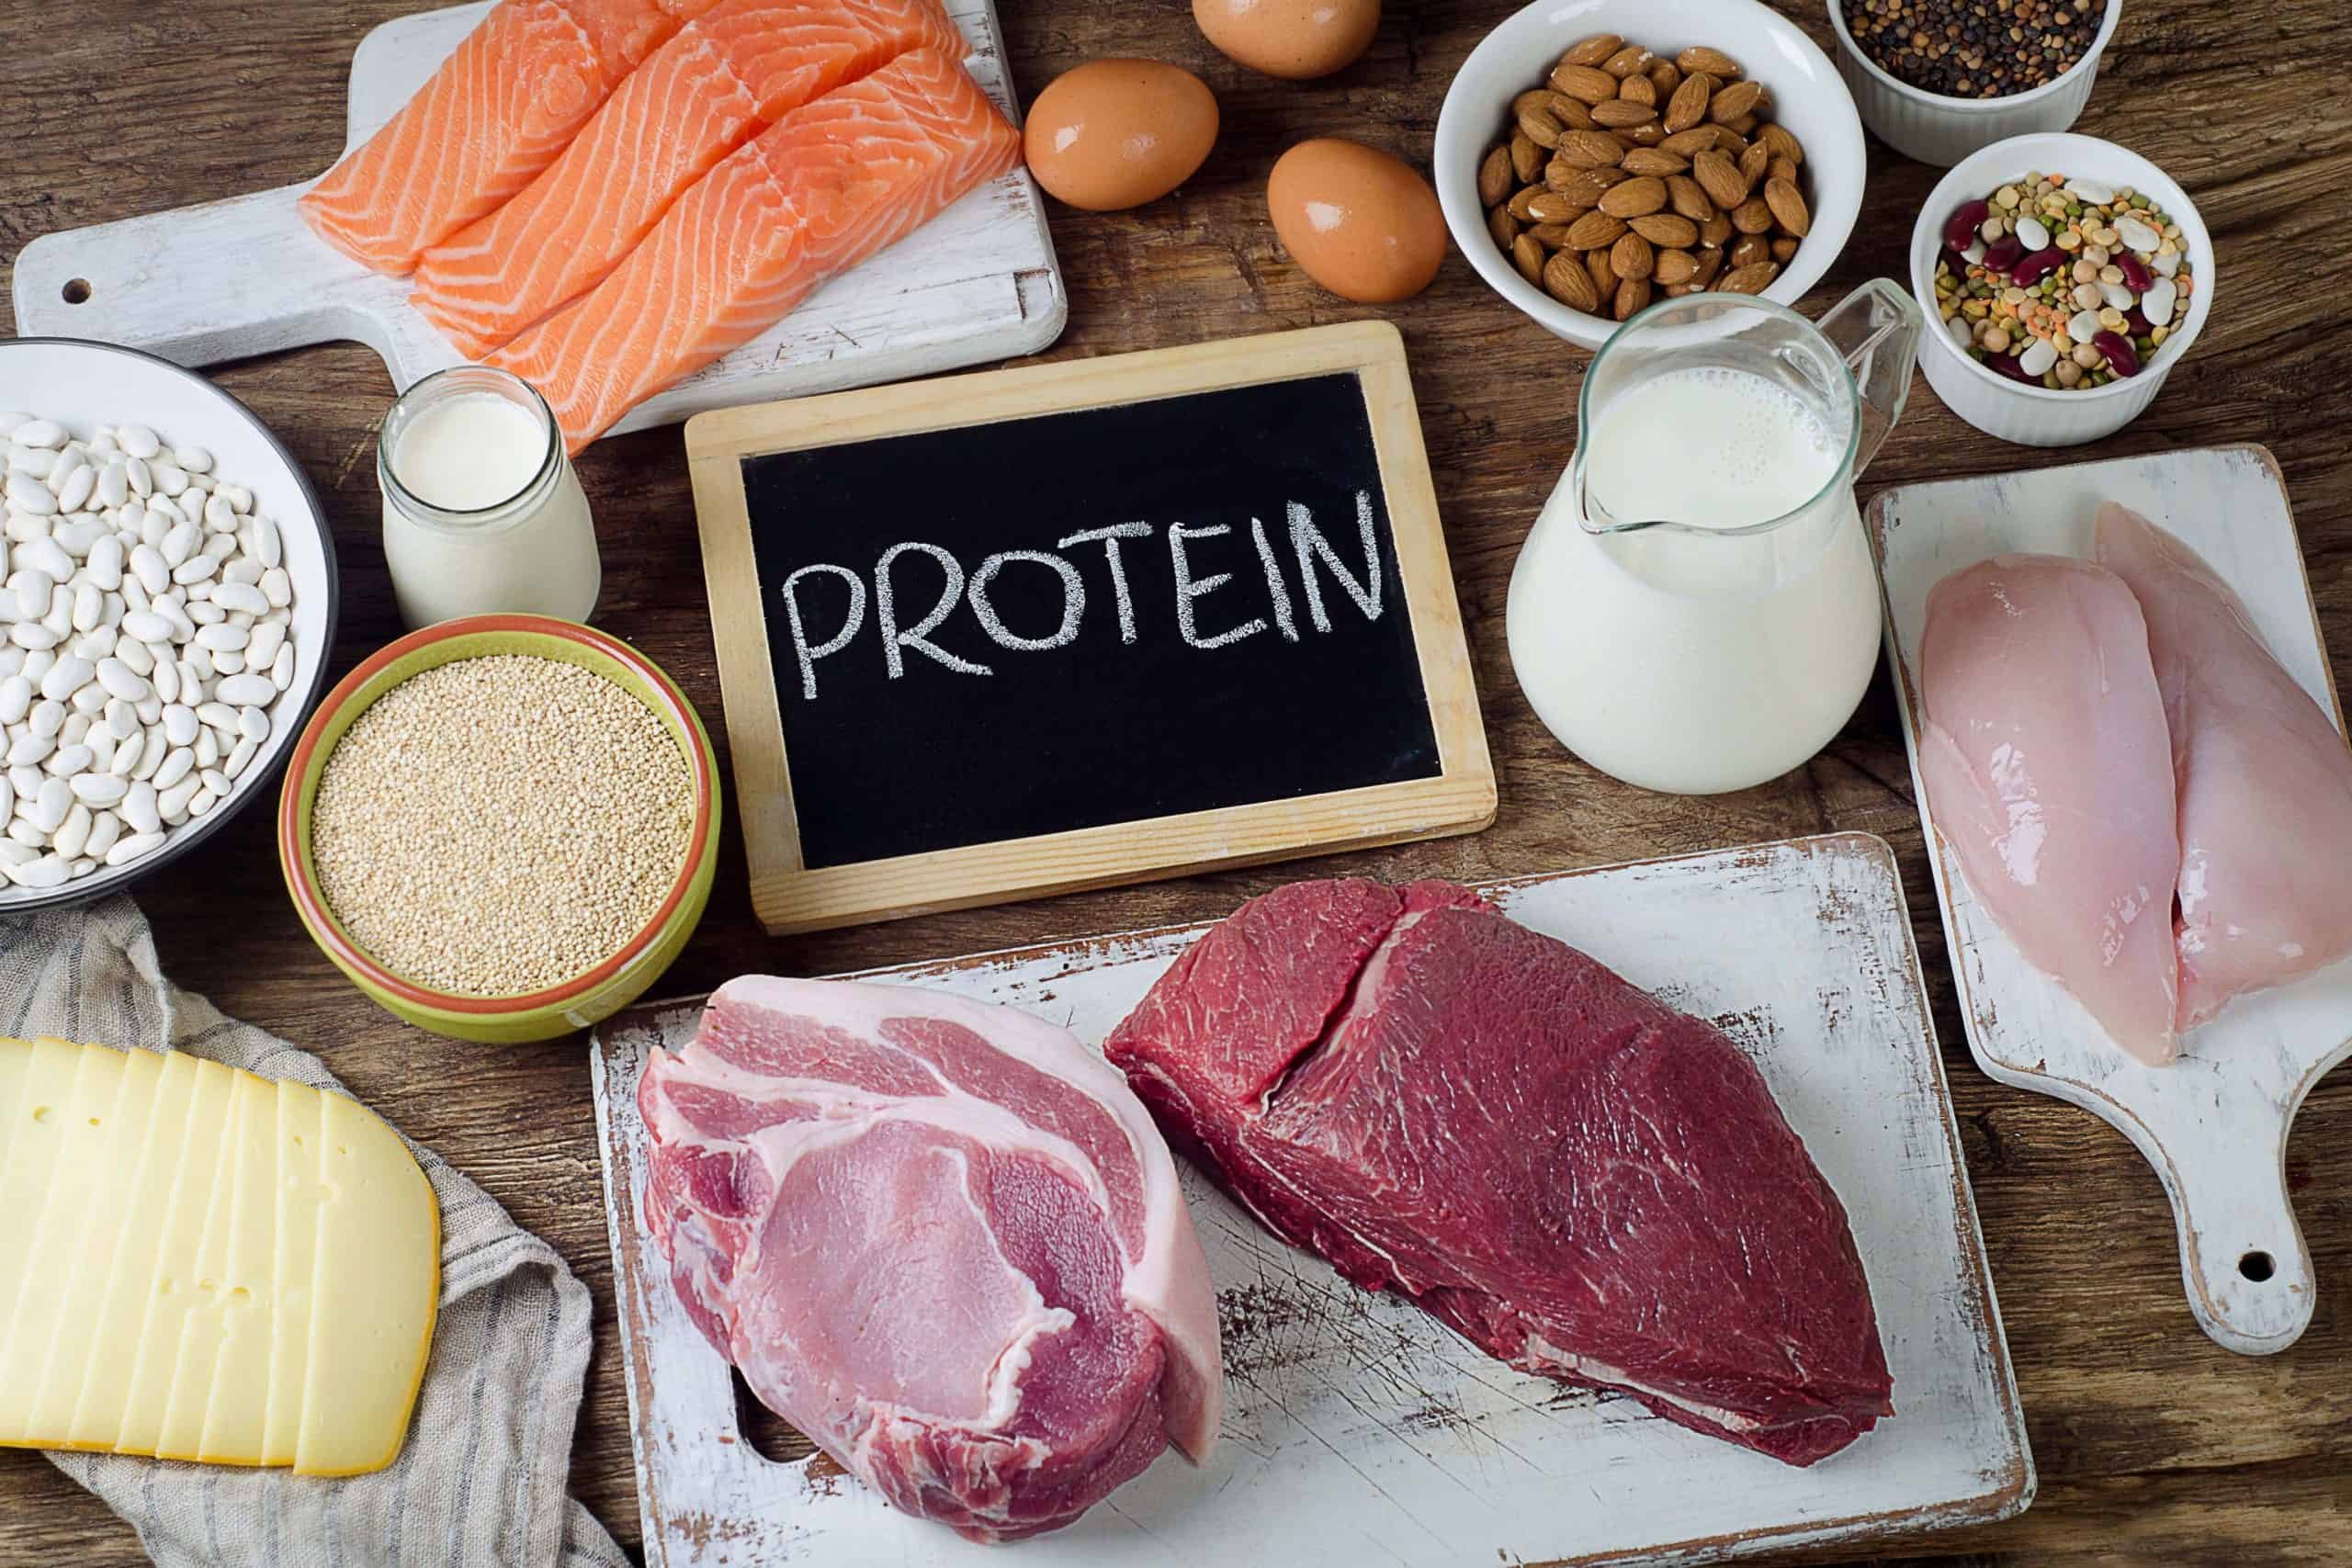 Protein as the main food group for gaining muscle mass